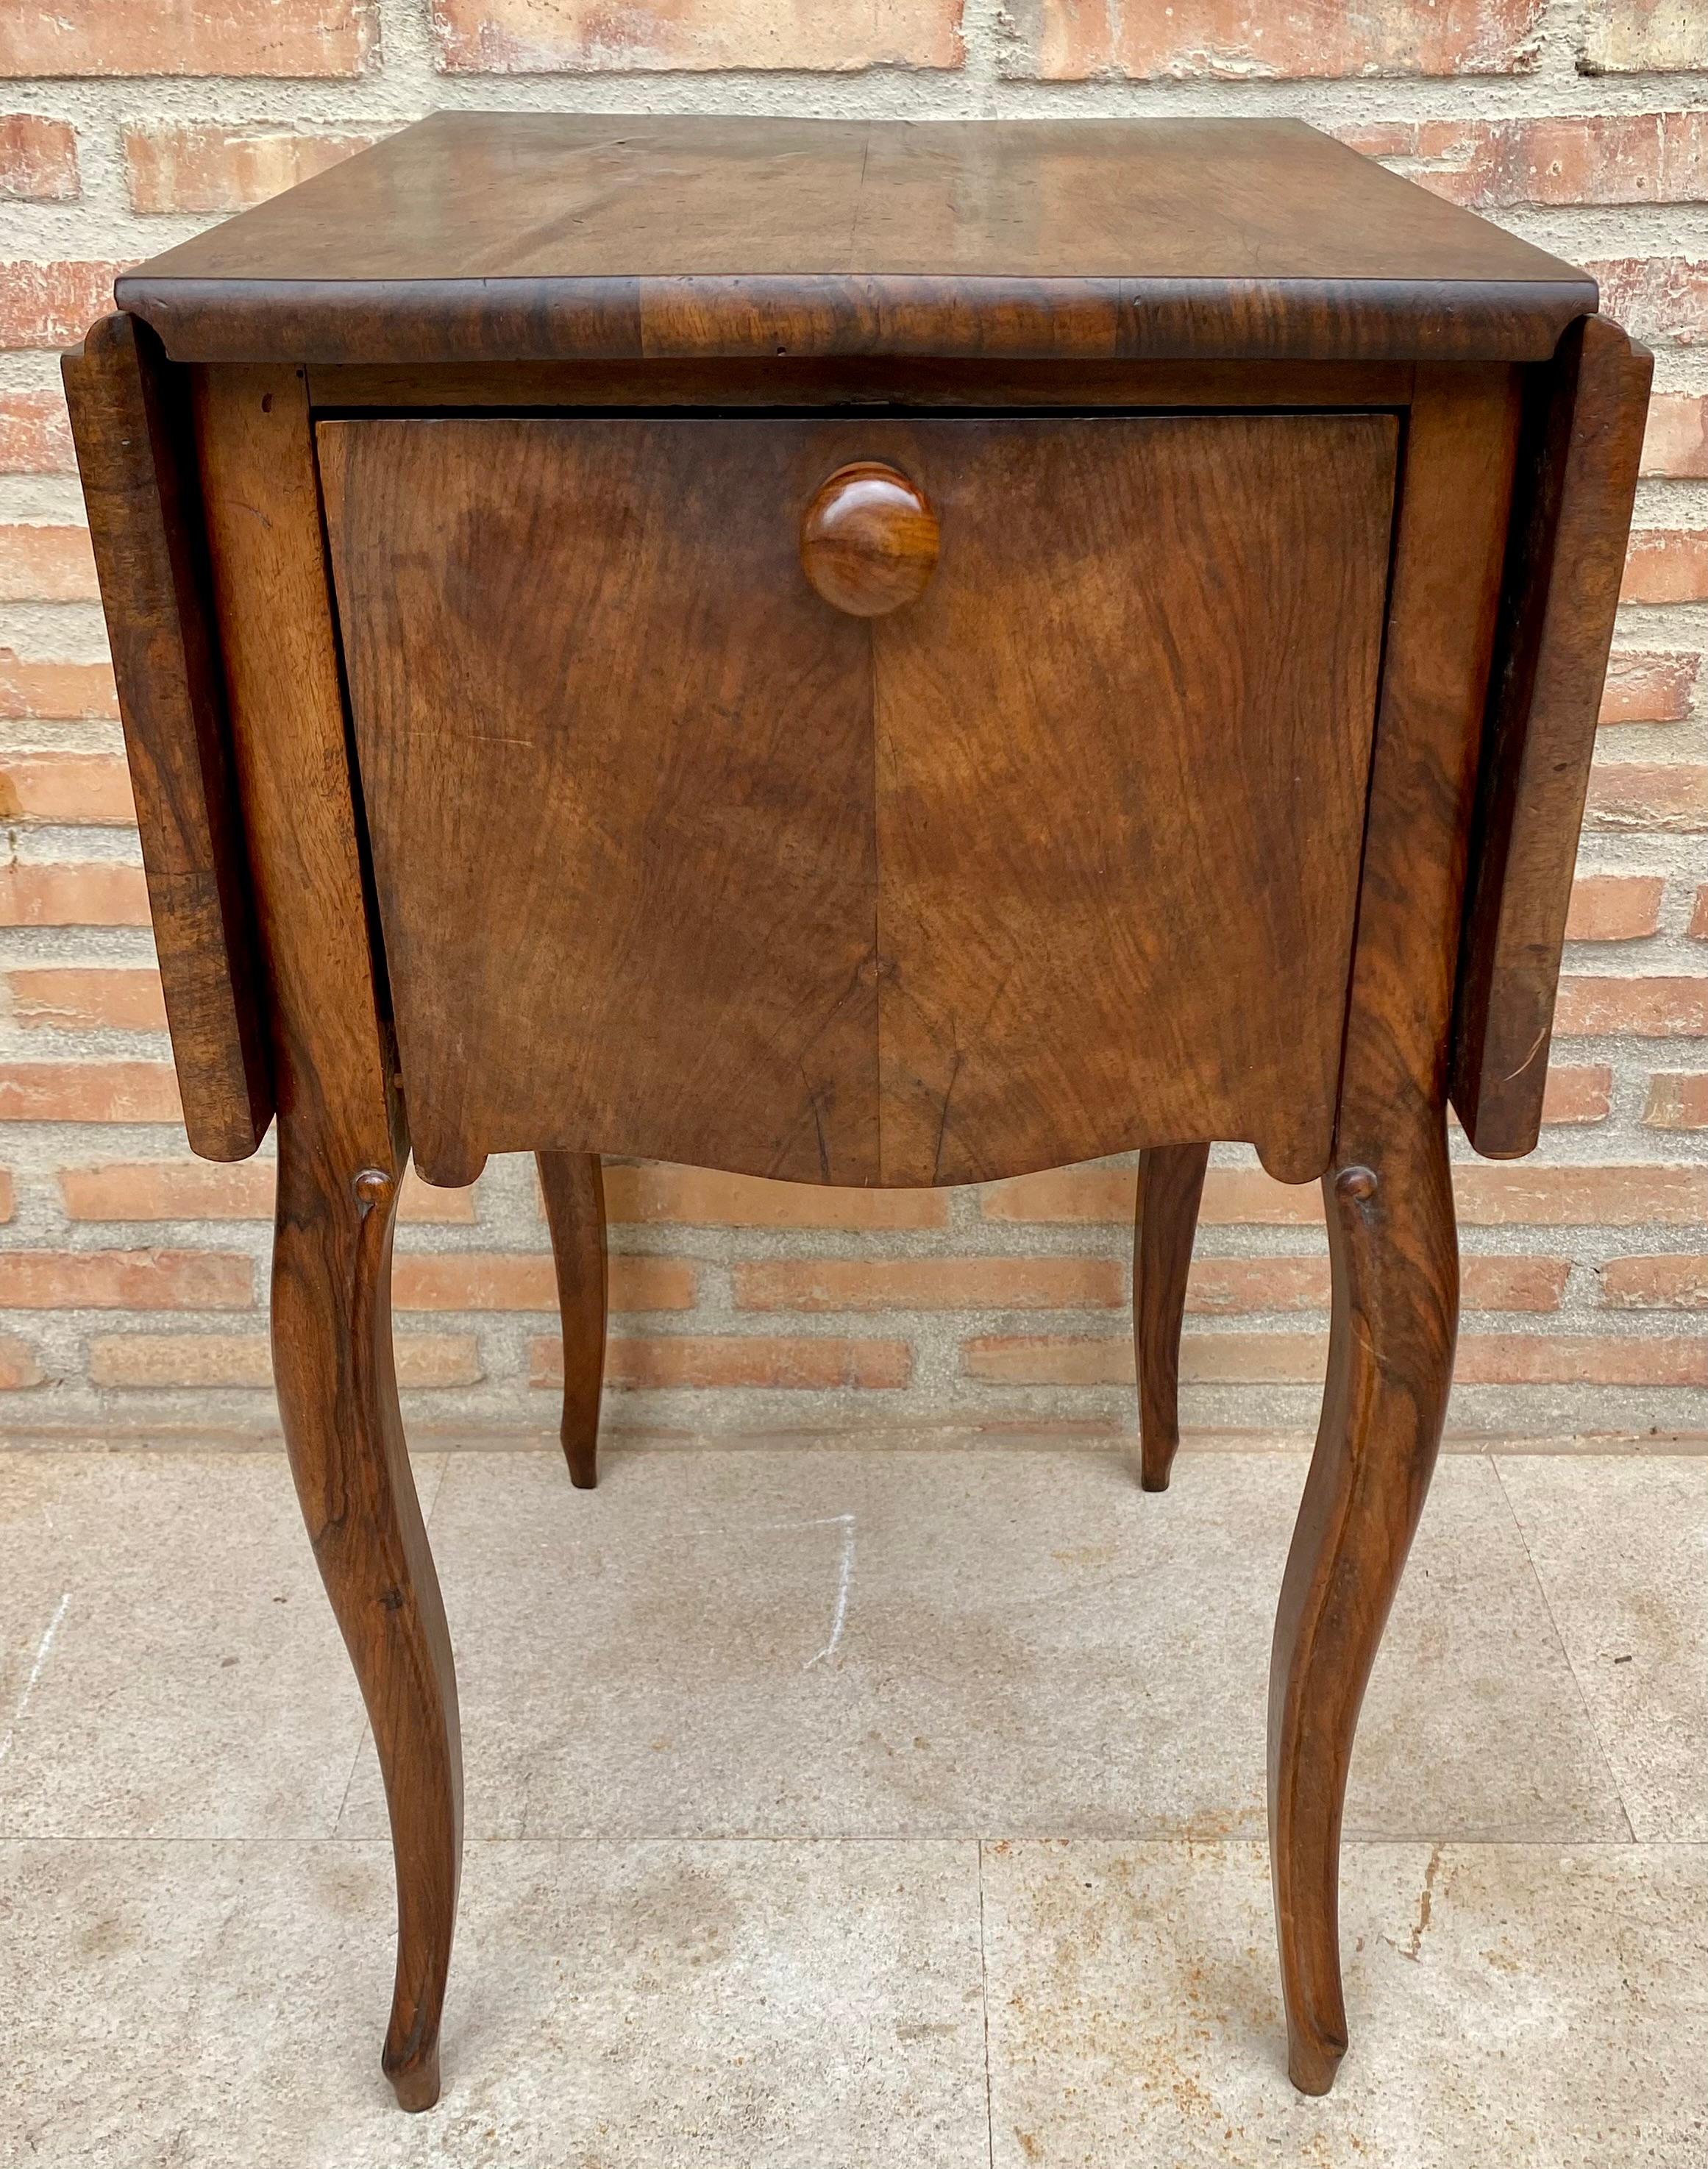 French side table with wings in walnut wood with roots decoration.
with a folding door on one side that have a wooden handle.
A very fine quality Regency period walnut side table you have.
Well preserved lid with flap on each side and door with